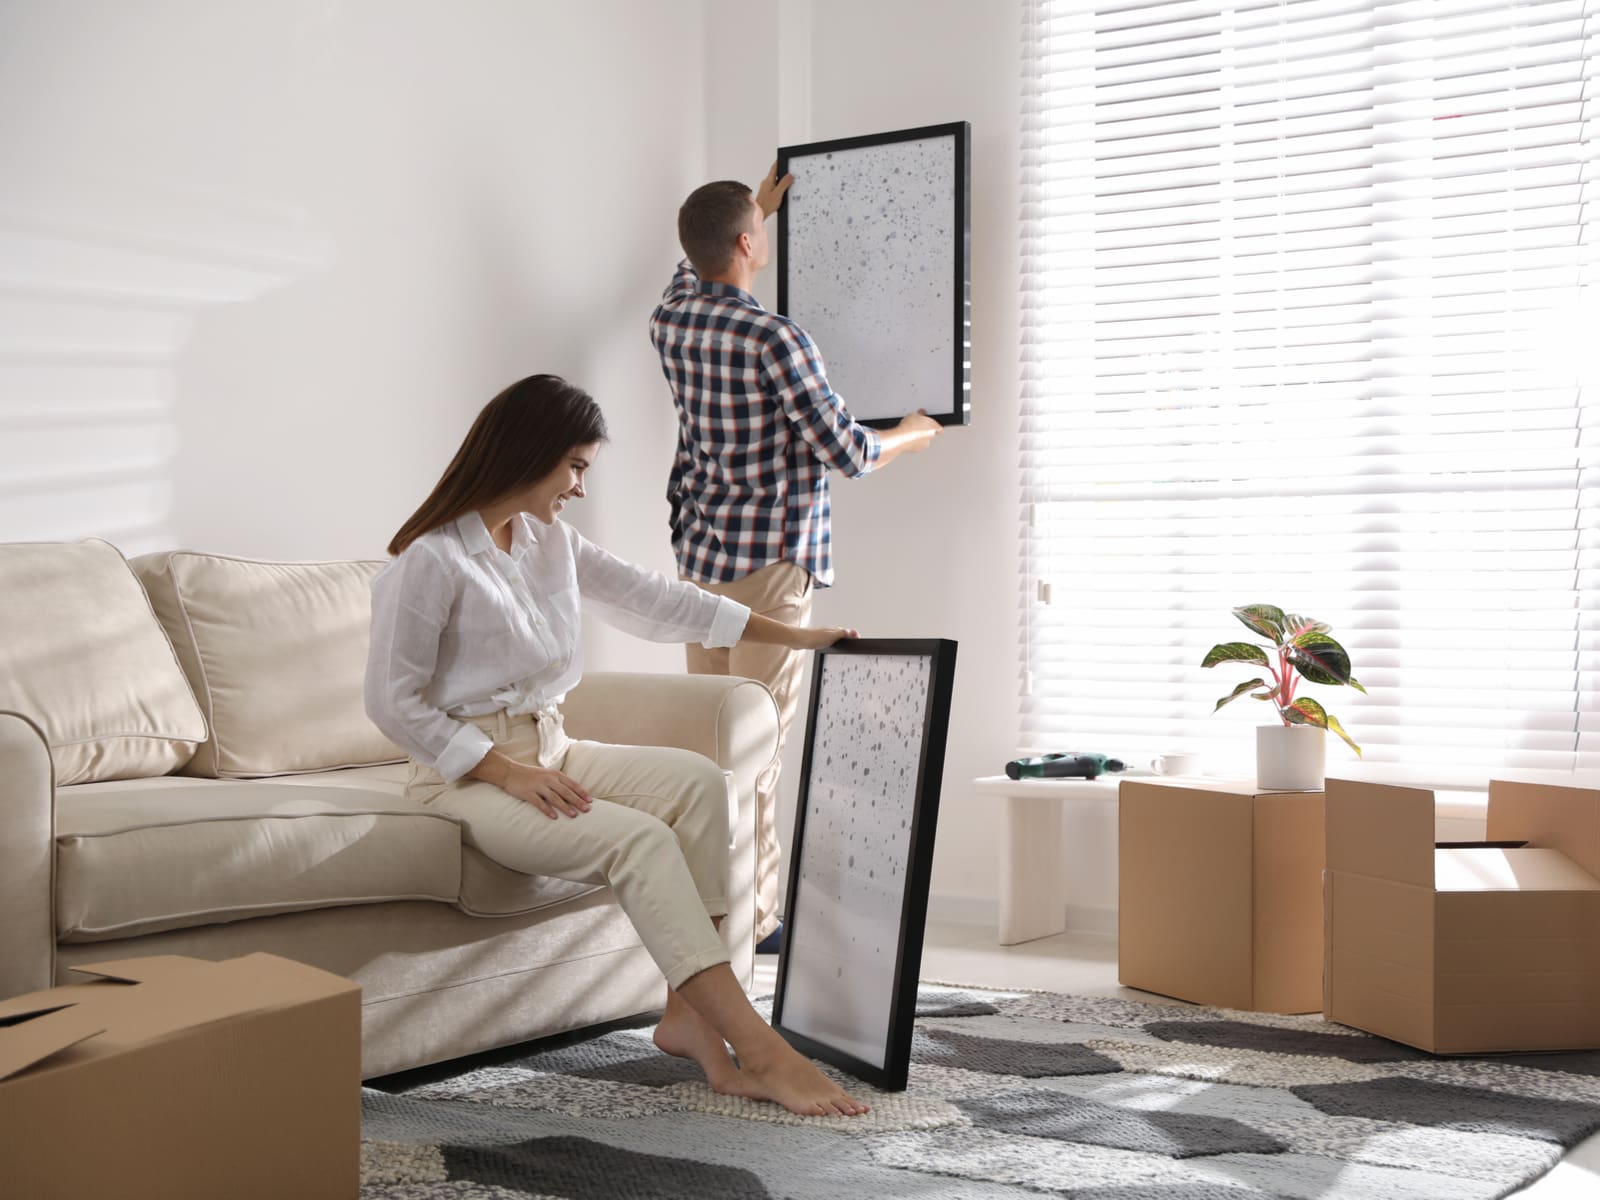 Two people decorating a living room with colors that go with white, including beige and greys